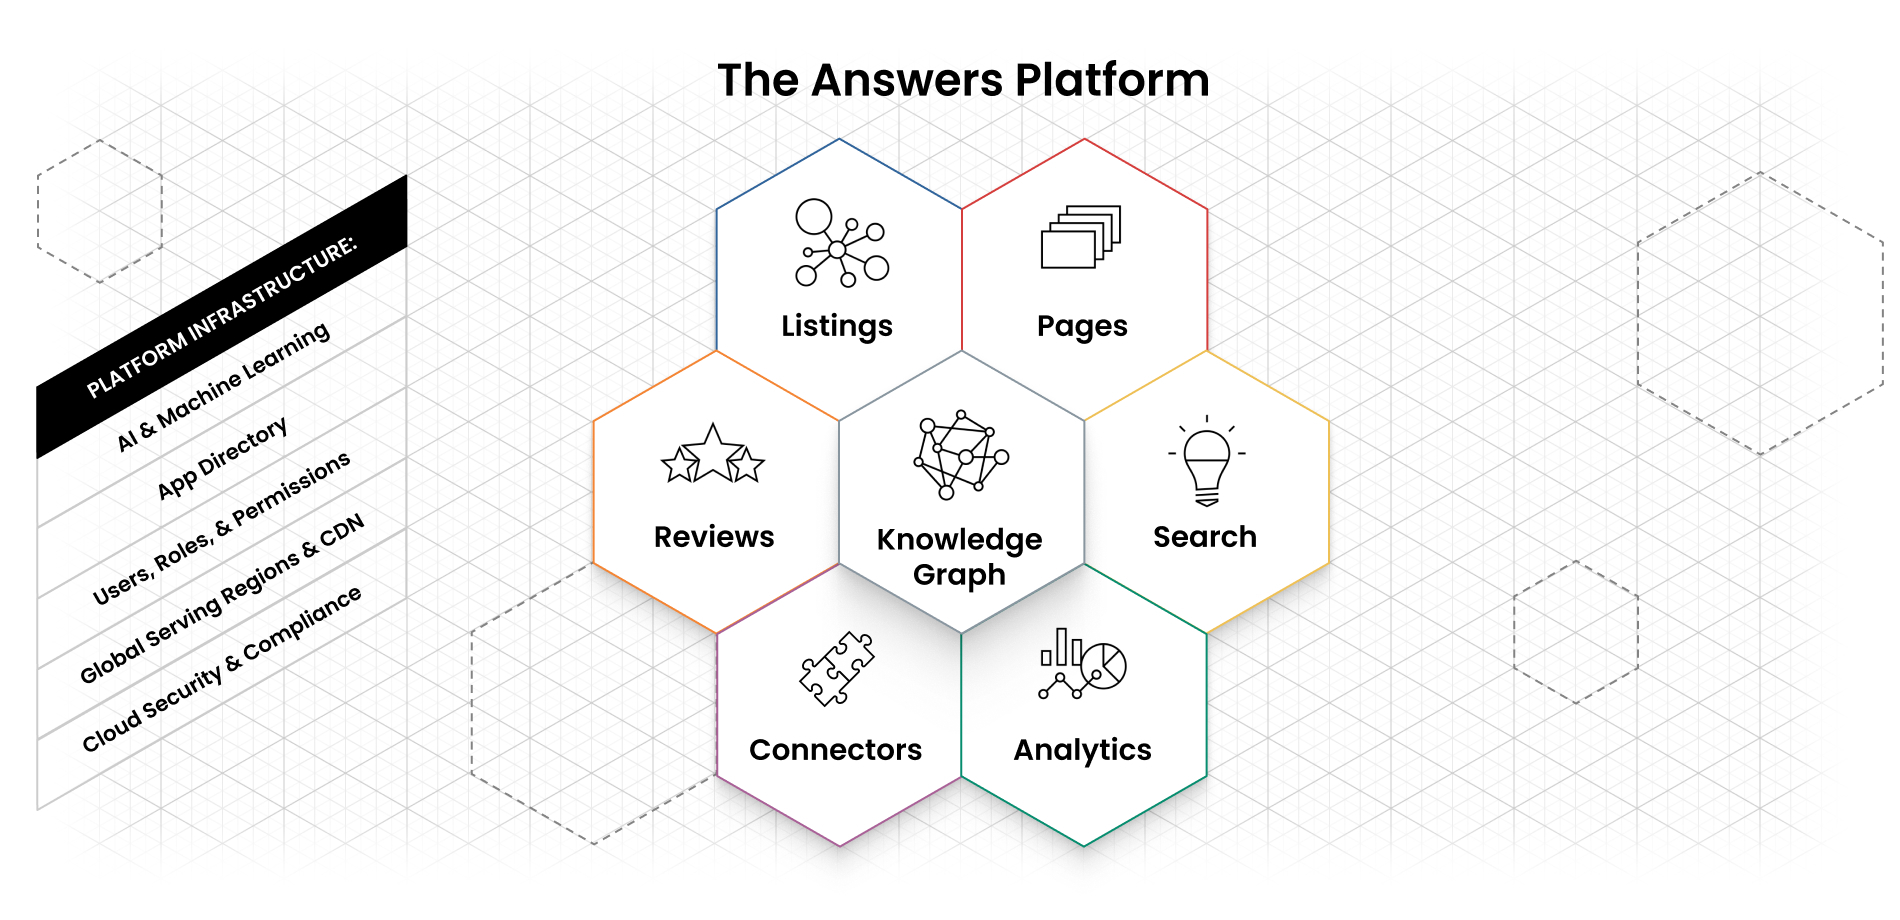 Graphic listing the name of the components that make up The Answers Platform - Pages, Listings, Knowledge Graph, Search, Analytics, Connectors, Reviews